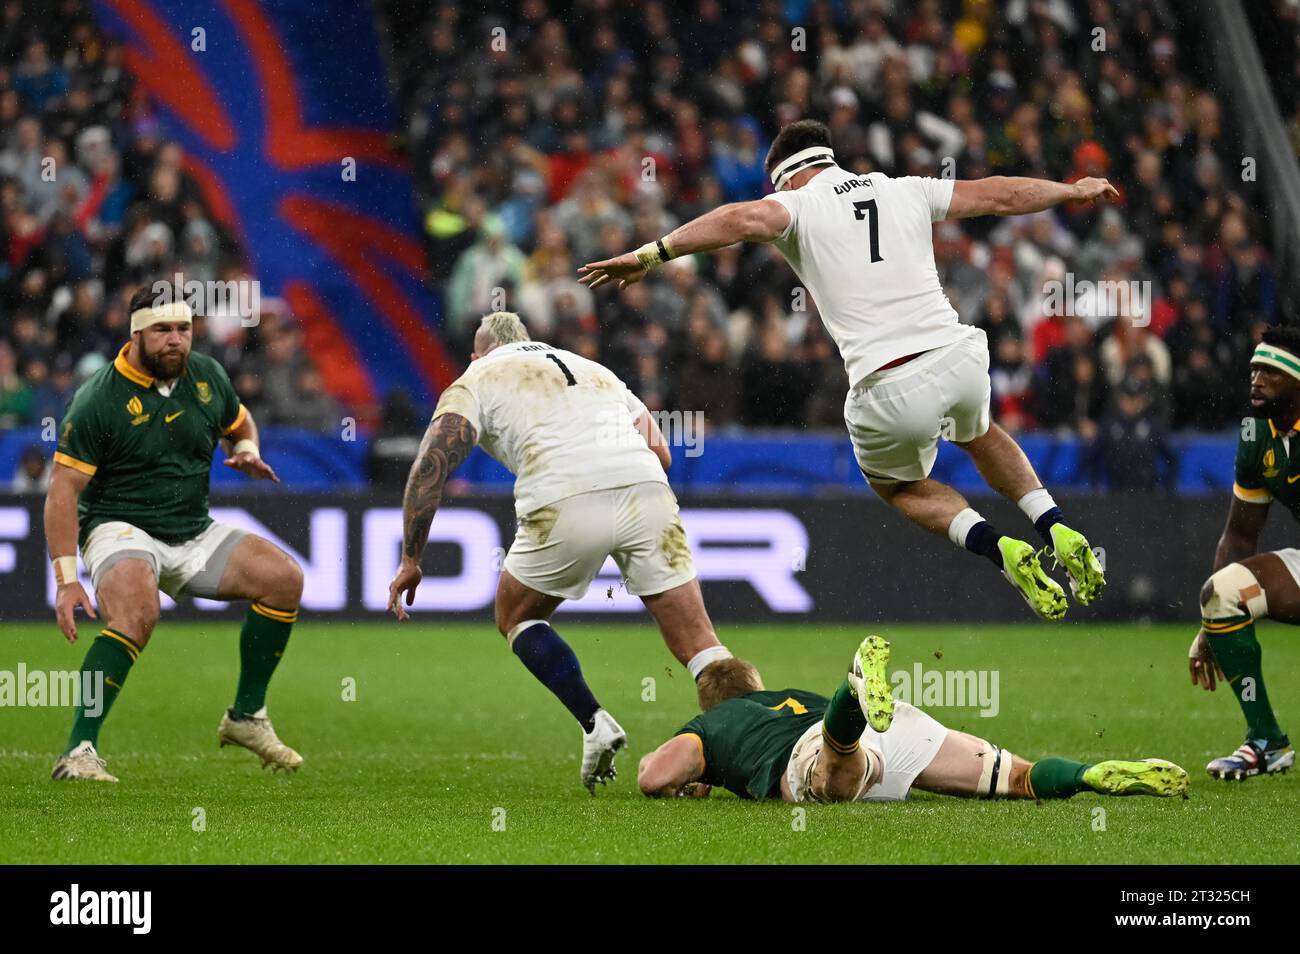 Saint Denis, France. 21st Oct, 2023. Julien Mattia/Le Pictorium - England - South Africa - Rugby World Cup - 21/10/2023 - France/Seine-Saint-Denis/Saint-Denis - Franz Malherbe, Joe Marler, Pieter-Steph Du Toit and Tom Curry during the Rugby World Cup semi-final between England and South Africa at the Stade de France on October 21, 2023. Credit: LE PICTORIUM/Alamy Live News Stock Photo